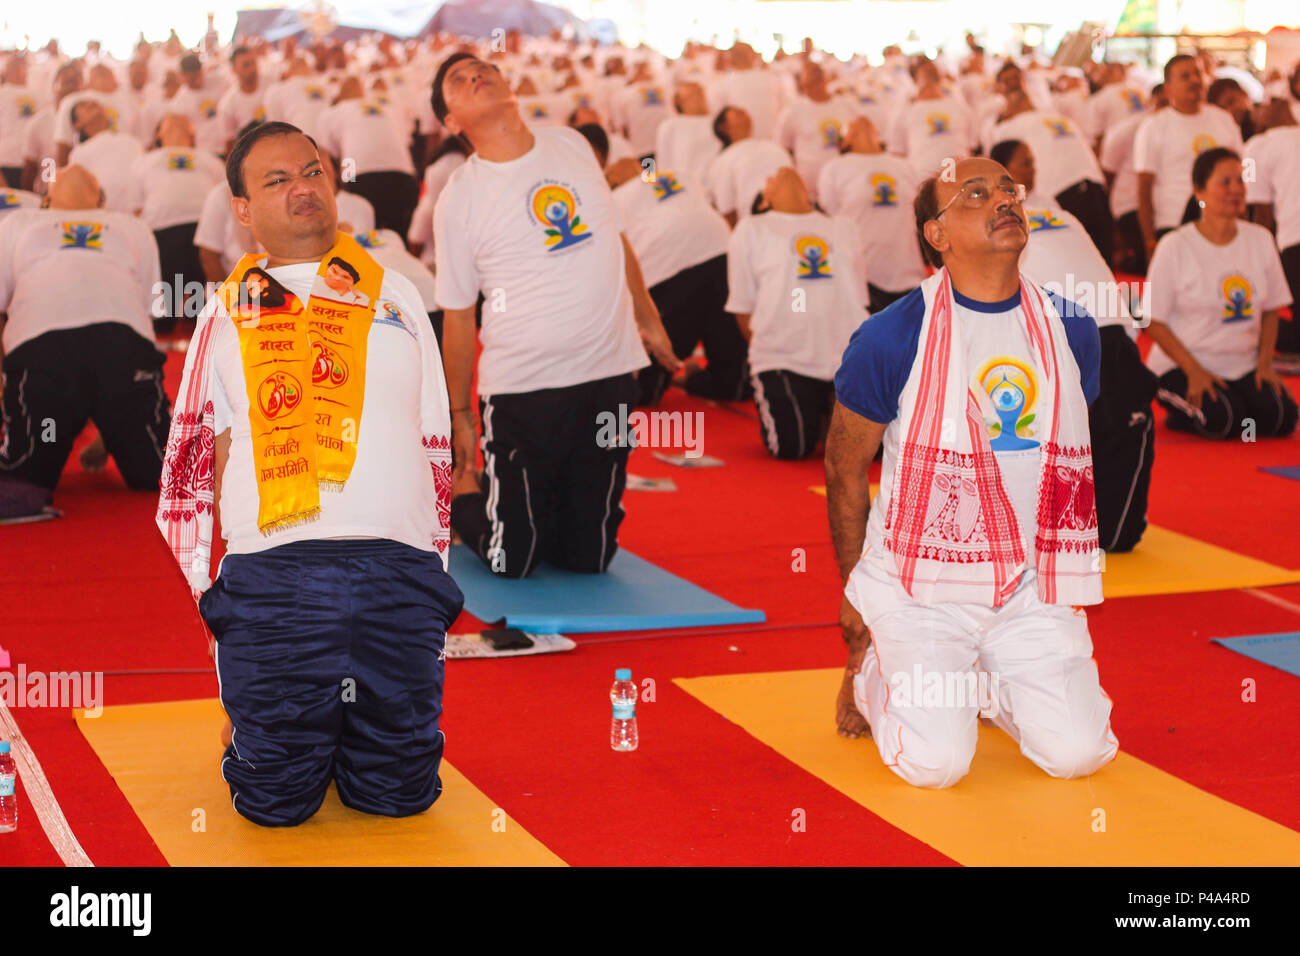 Guwahati, Assam, India. 21st June, 2018. 4th International Day of Yoga.  Union minister Vijay Goel and BJP Kamrup metro Deputy Commissioner Virendra Mittal participated in a yoga session during the 4th International Day of Yoga, in Guwahati, Assam. Credit: David Talukdar/Alamy Live News Stock Photo